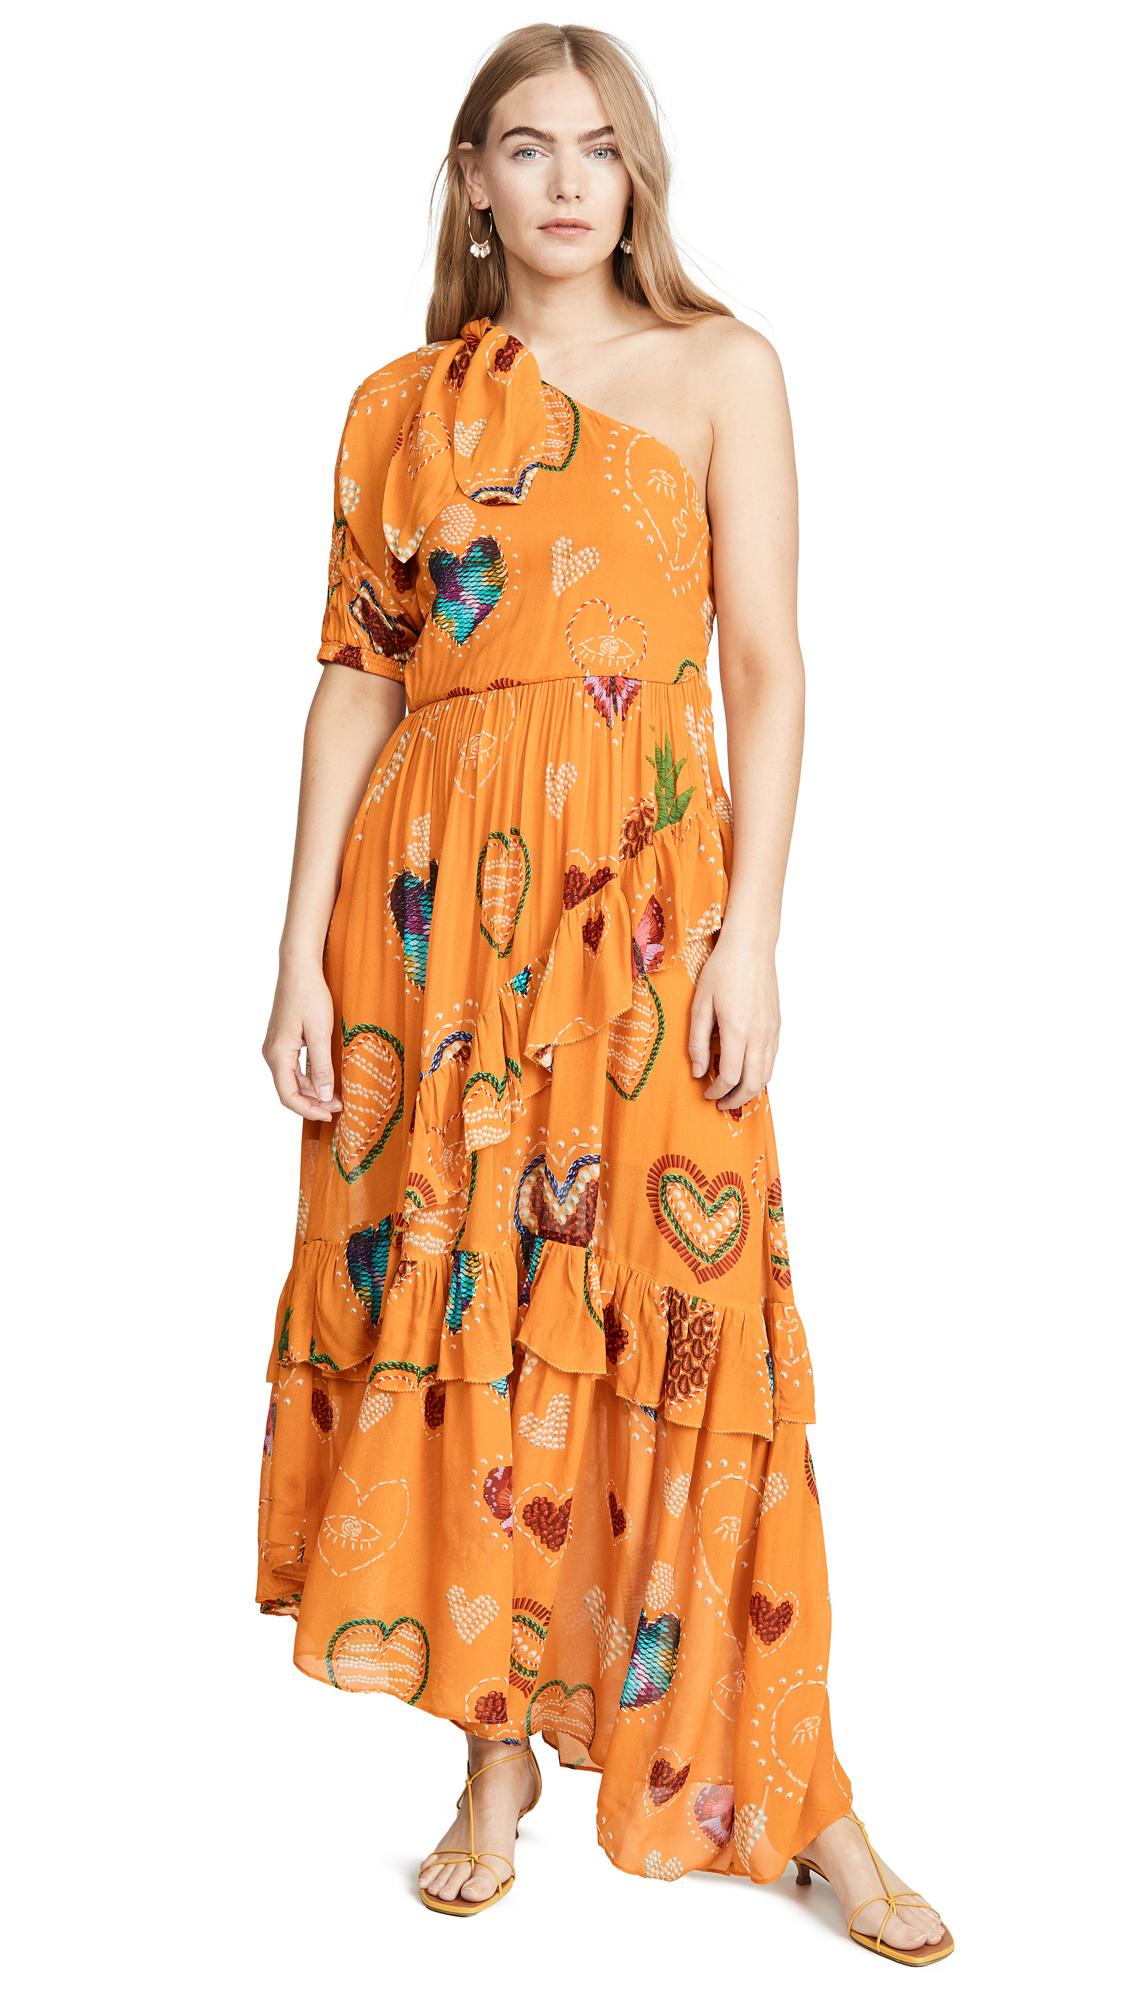 FARM Rio Synthetic Yellow Hearts One Shoulder Dress in Orange - Lyst